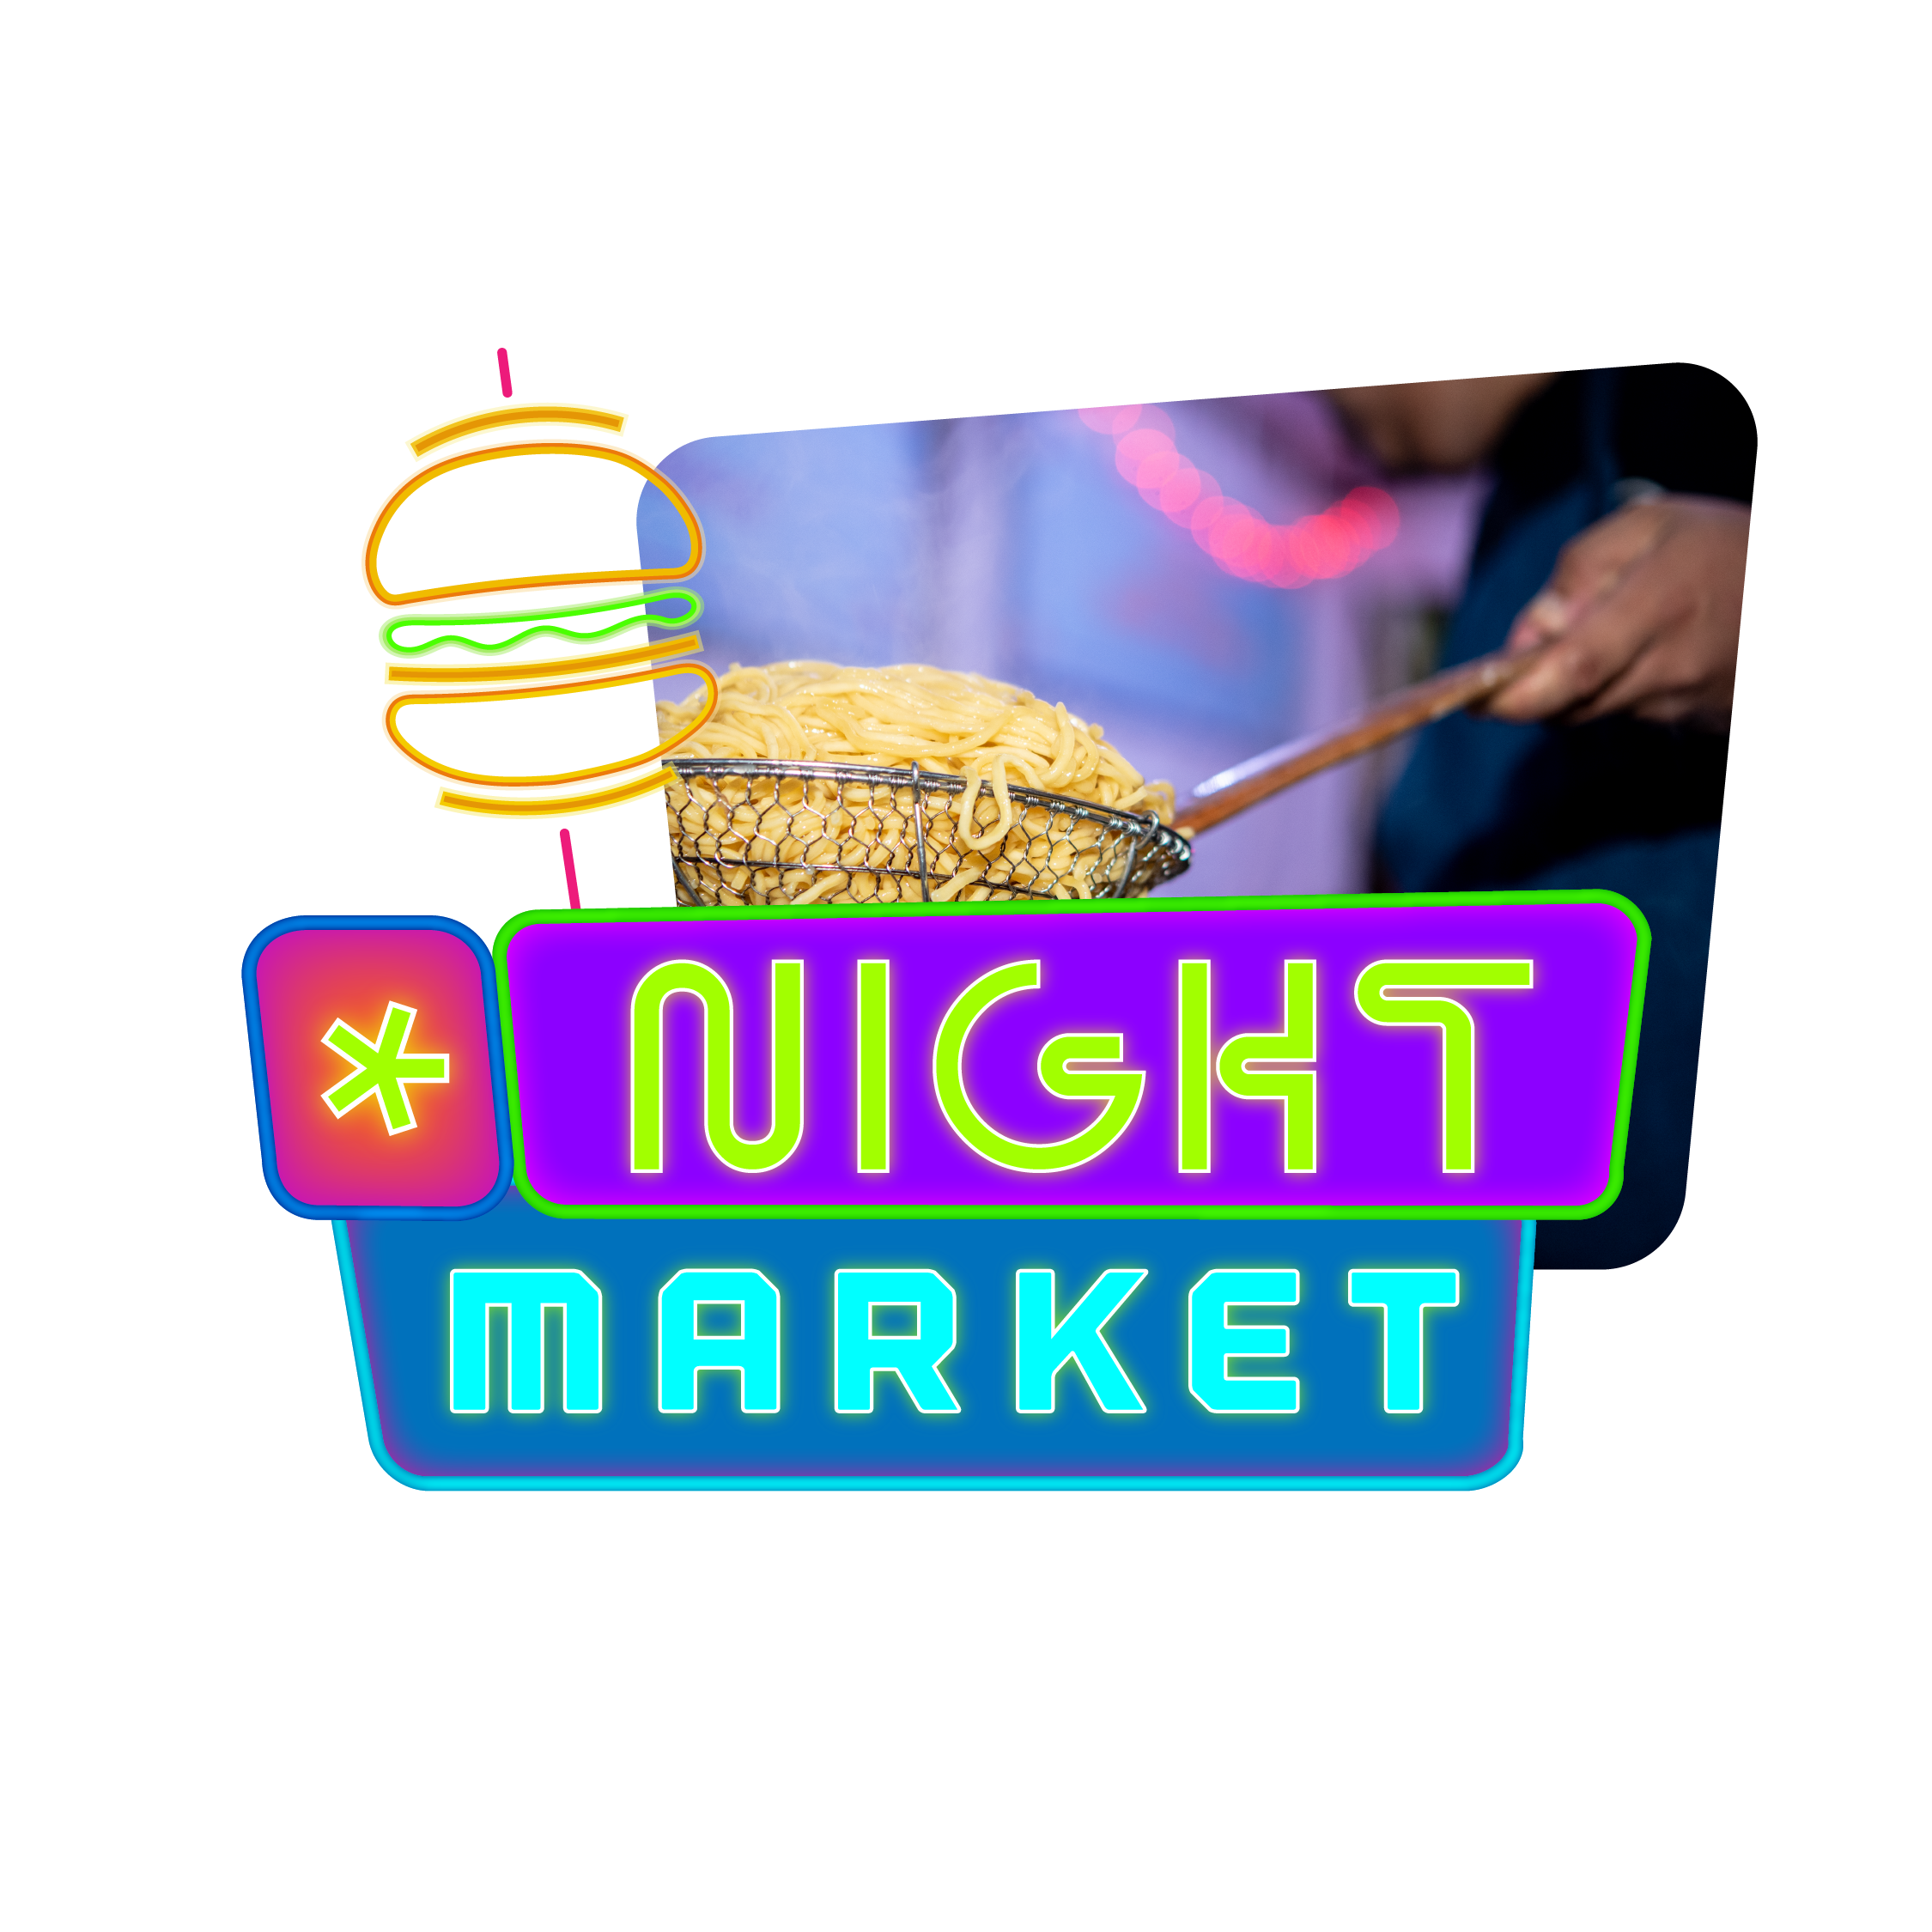 Feast Night Market eventID with illustrated depiction of neon sign saying Night market in front of an image of noodles